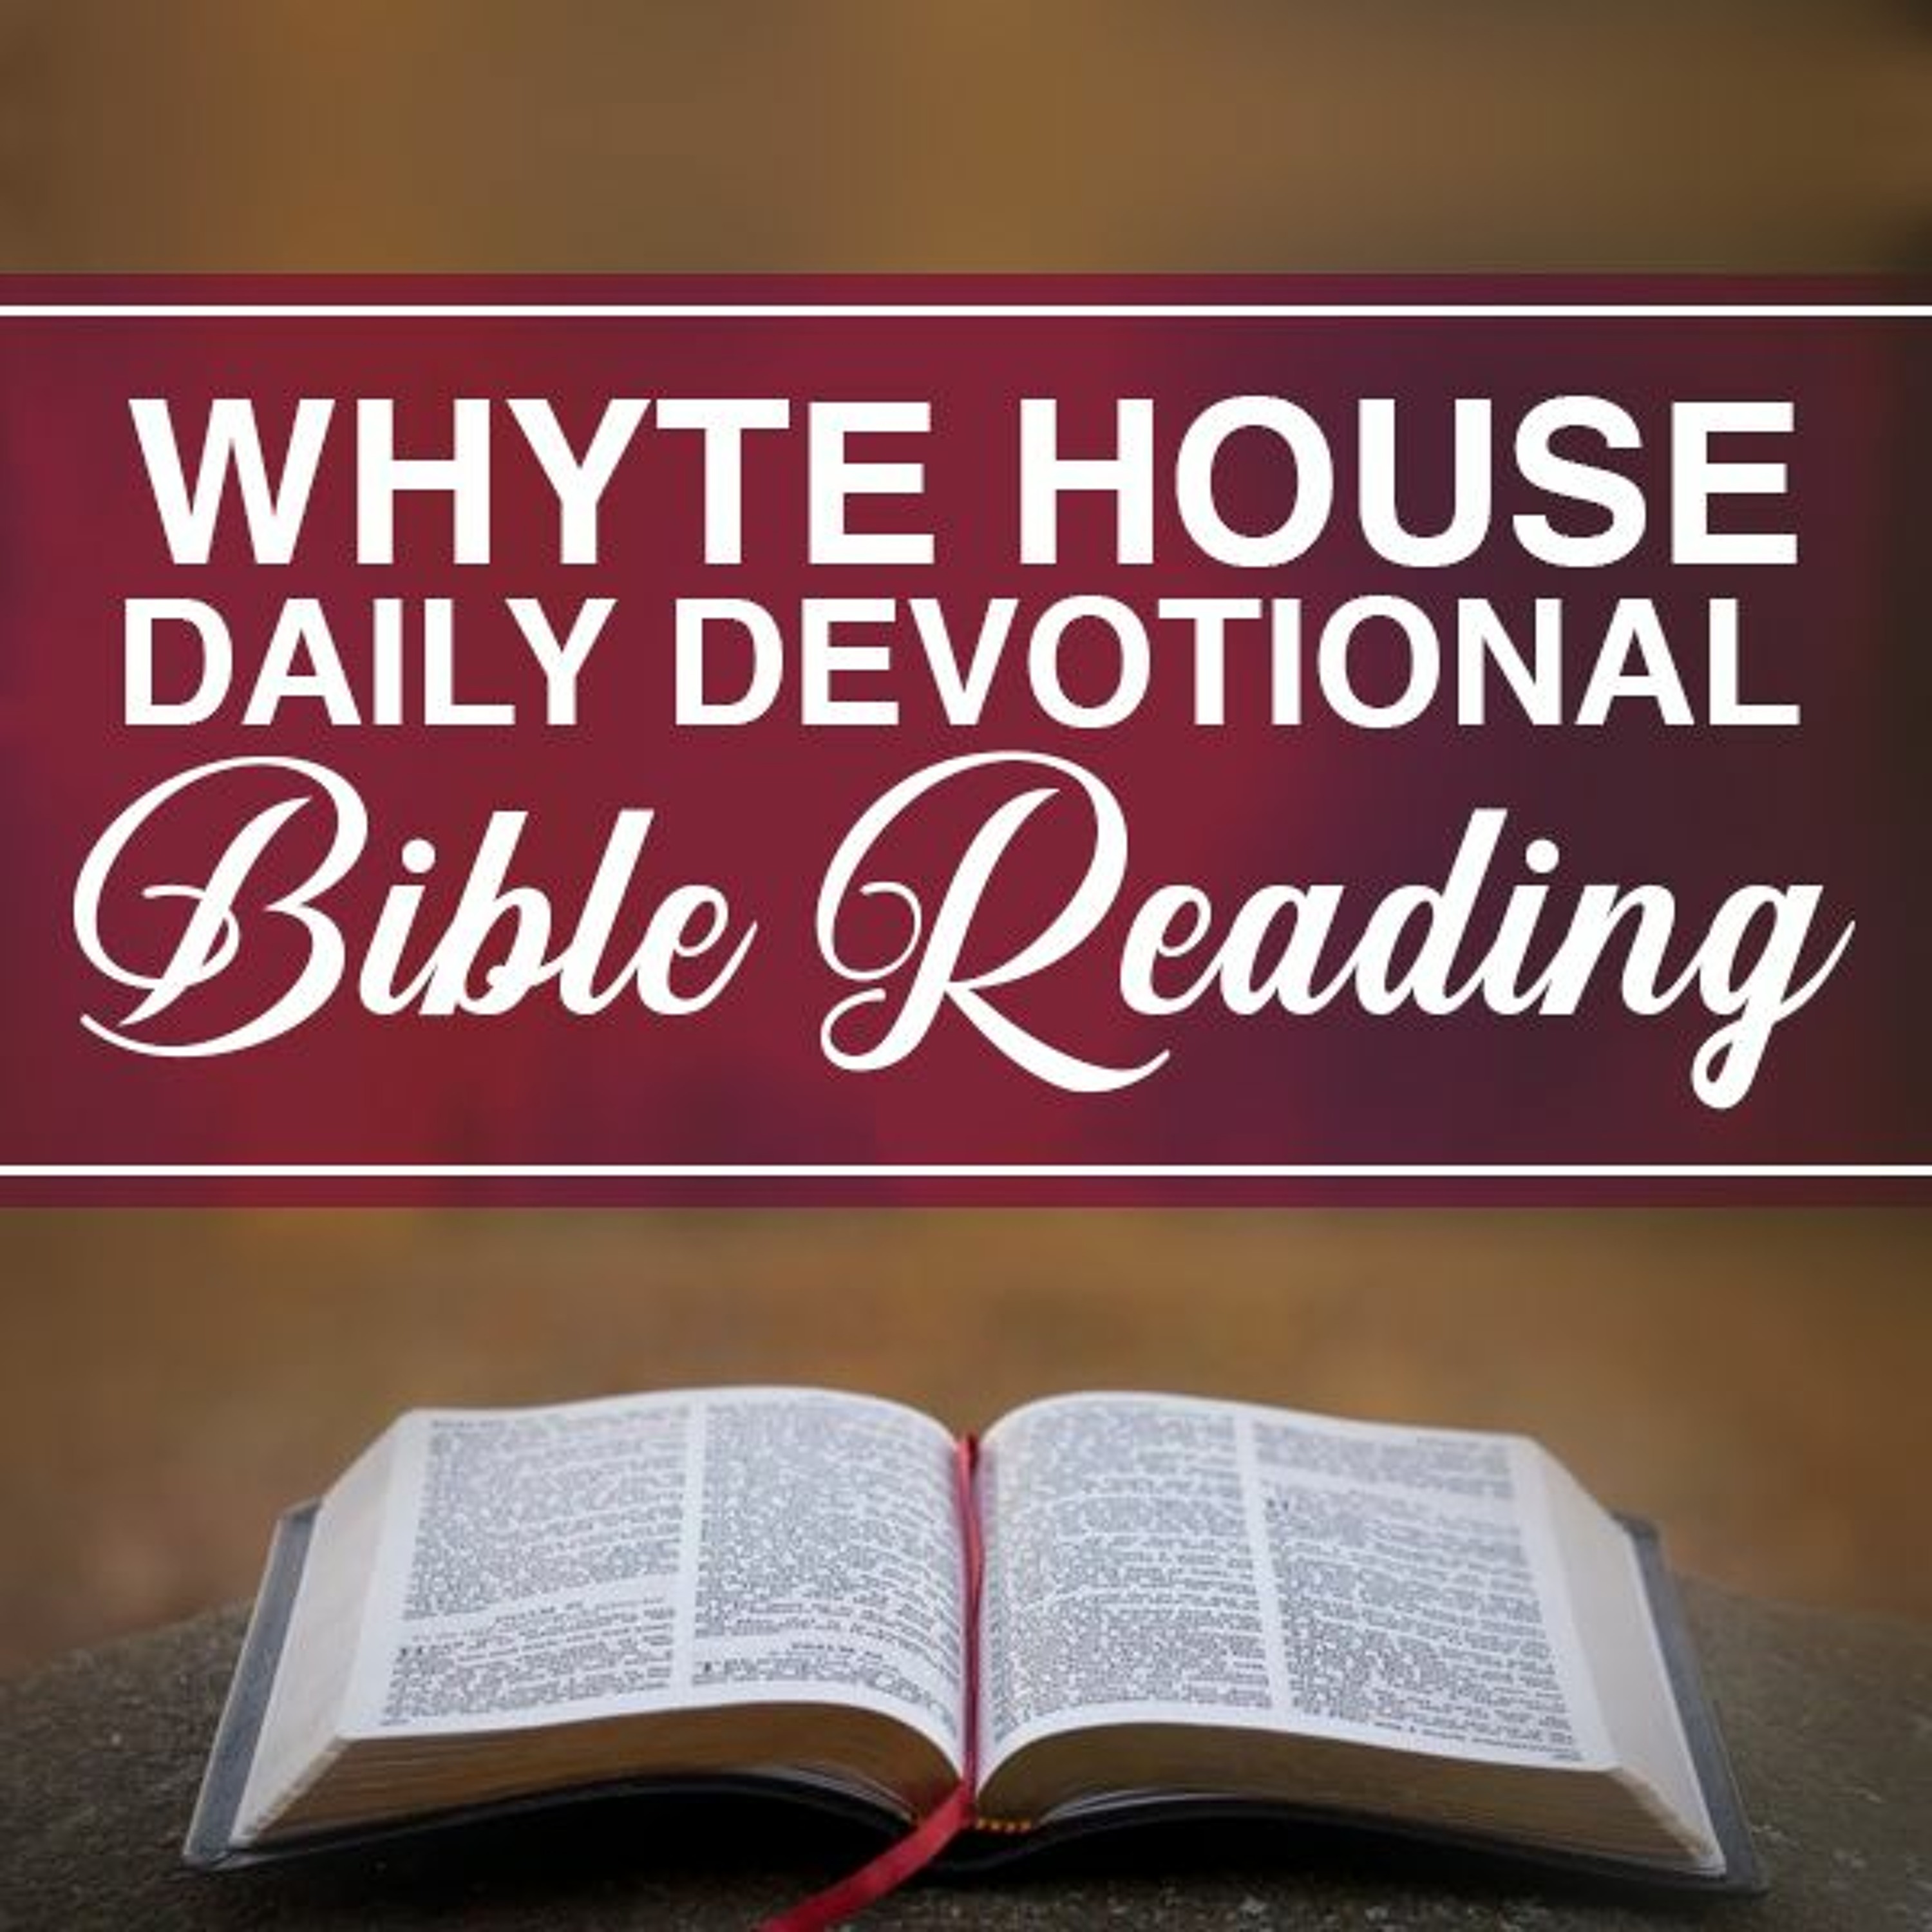 Whyte House Daily Reading of the Chronological Bible Episode #708:  1 Kings 15:27-34